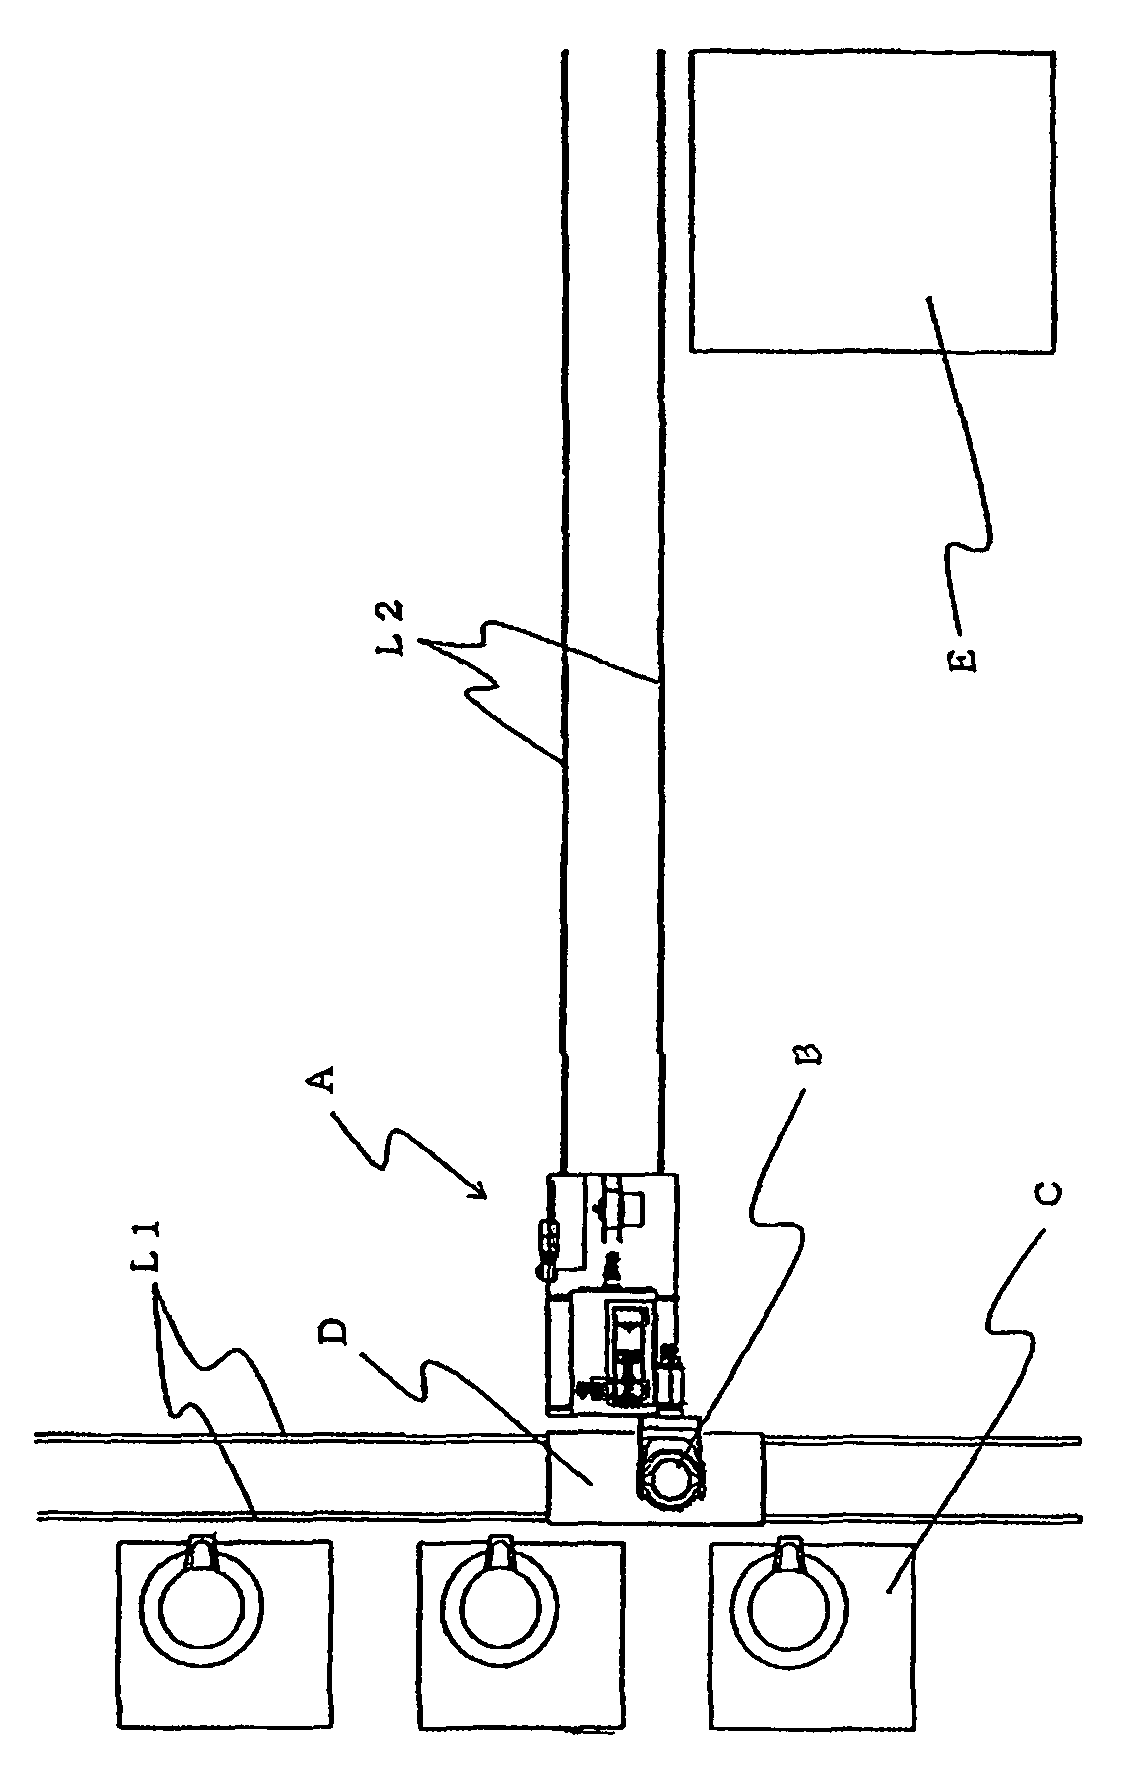 Carriage to transport a ladle and to transfer molten metal into equipment for pouring and transportation line for transporting molten metal